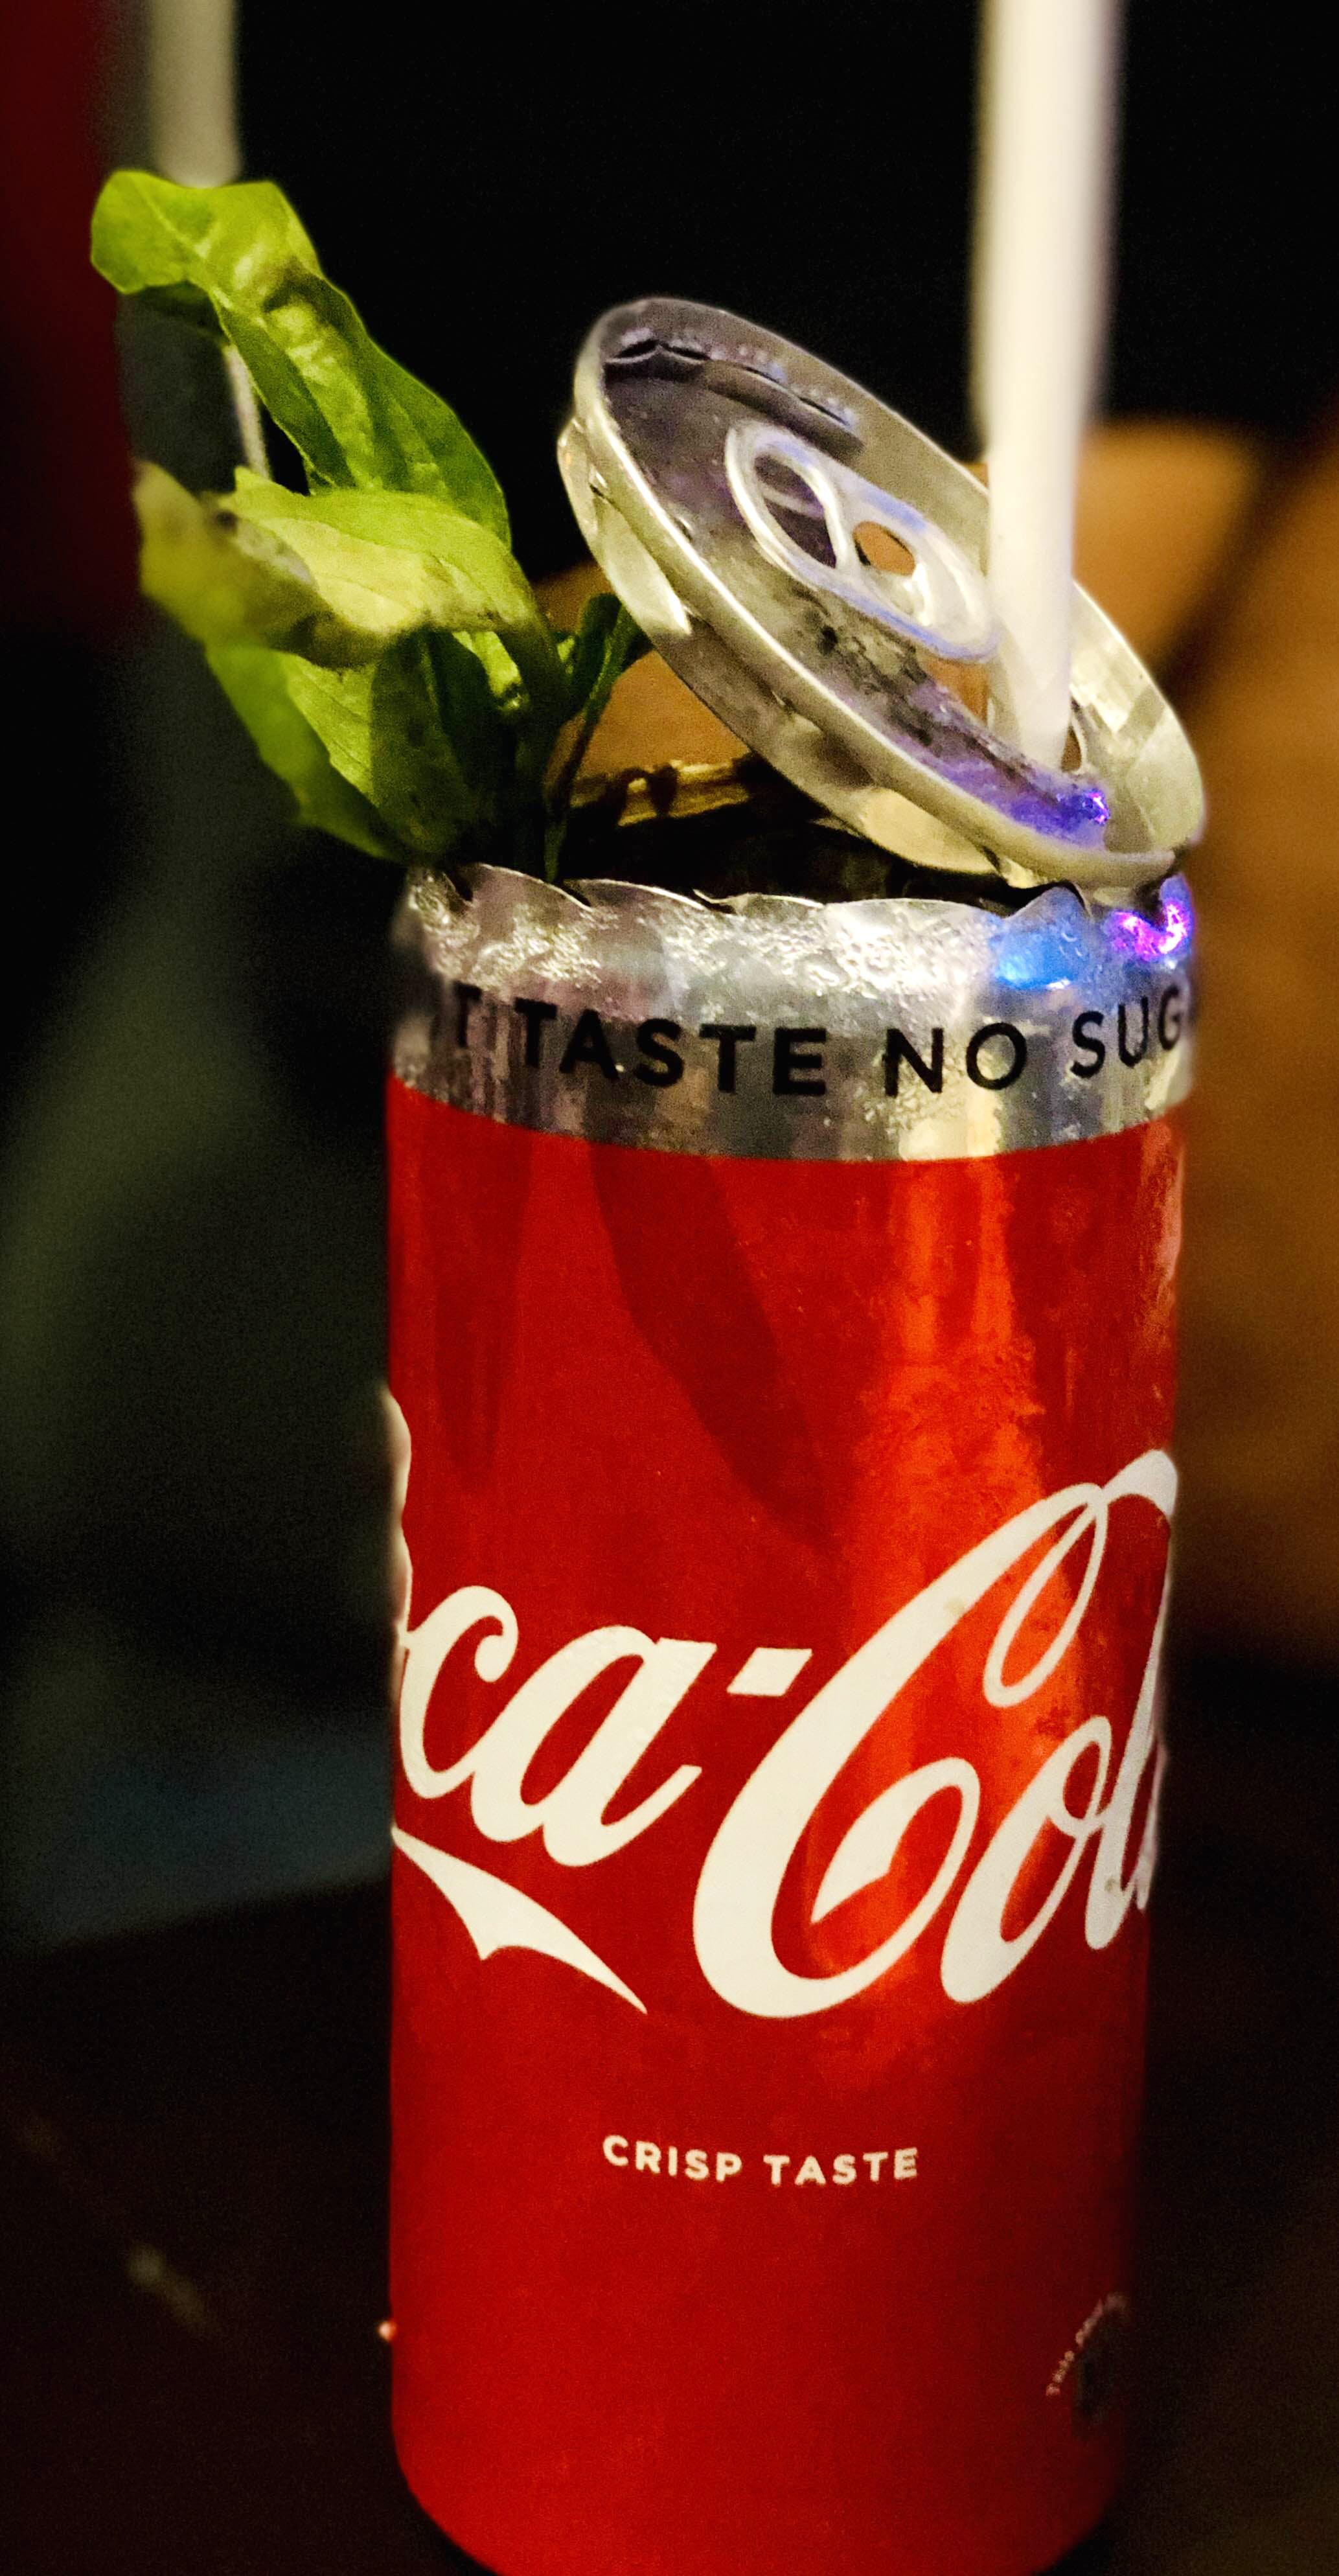 Beverage can,Coca-cola,Cola,Aluminum can,Drink,Soft drink,Carbonated soft drinks,Non-alcoholic beverage,Tin can,Coca